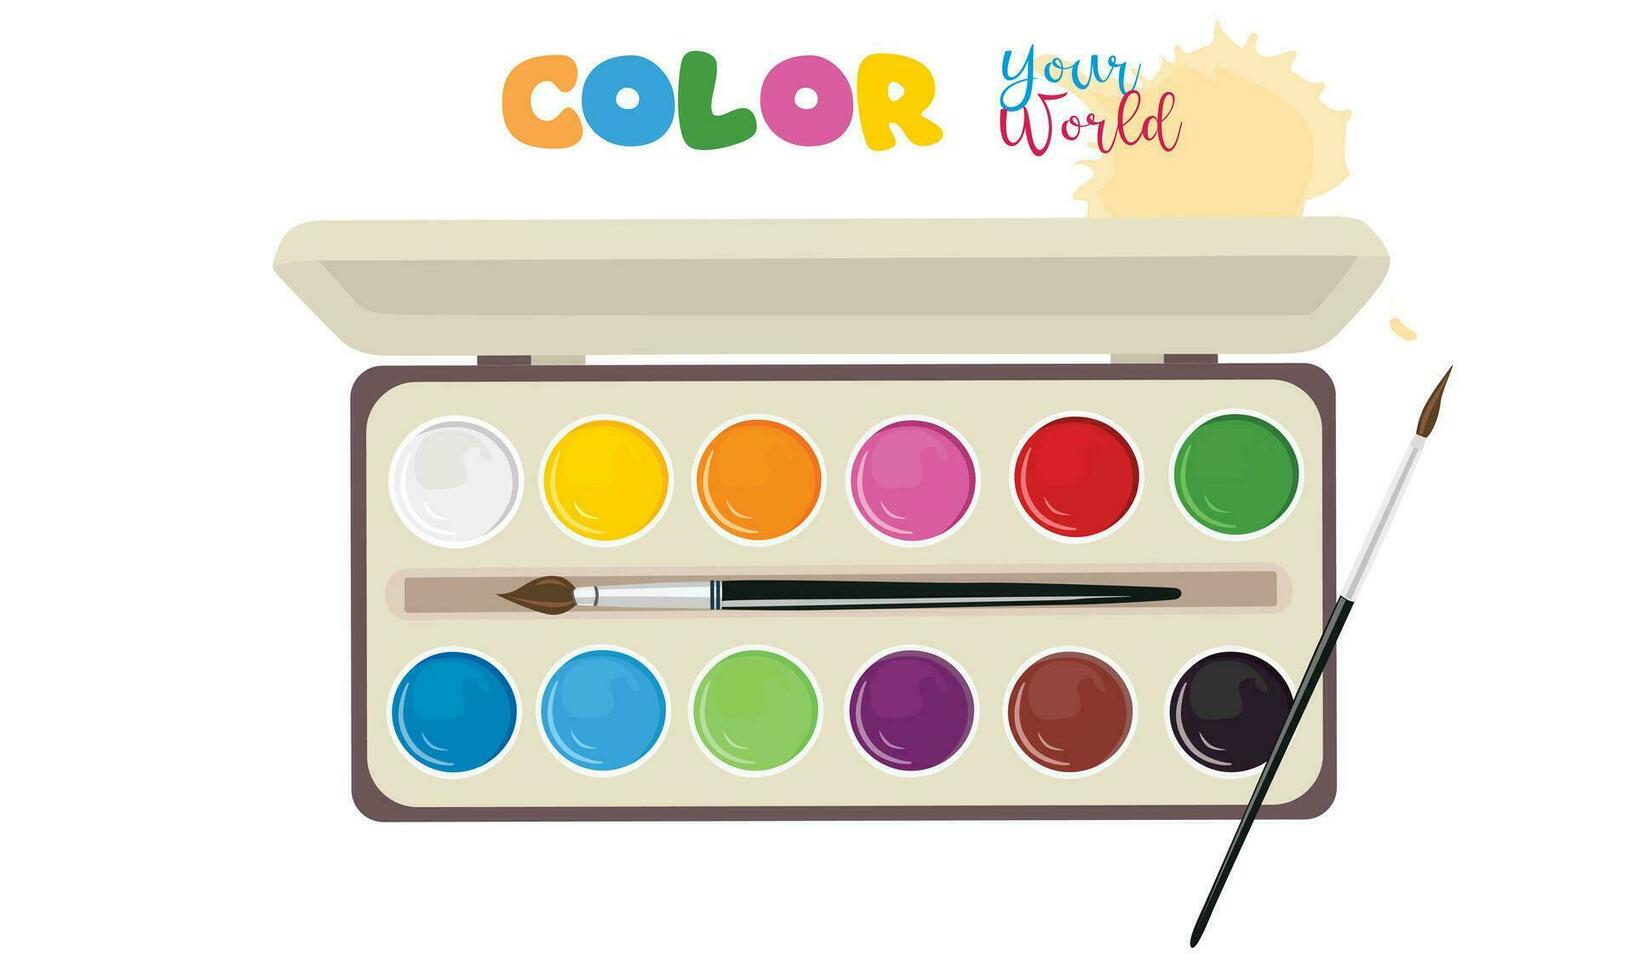 Watercolor paint box with paint brushes vector illustration. Watercolor paint box with colorful round paint pots. Back to school concept. School supplies collection.  Art concept. Cartoon style.